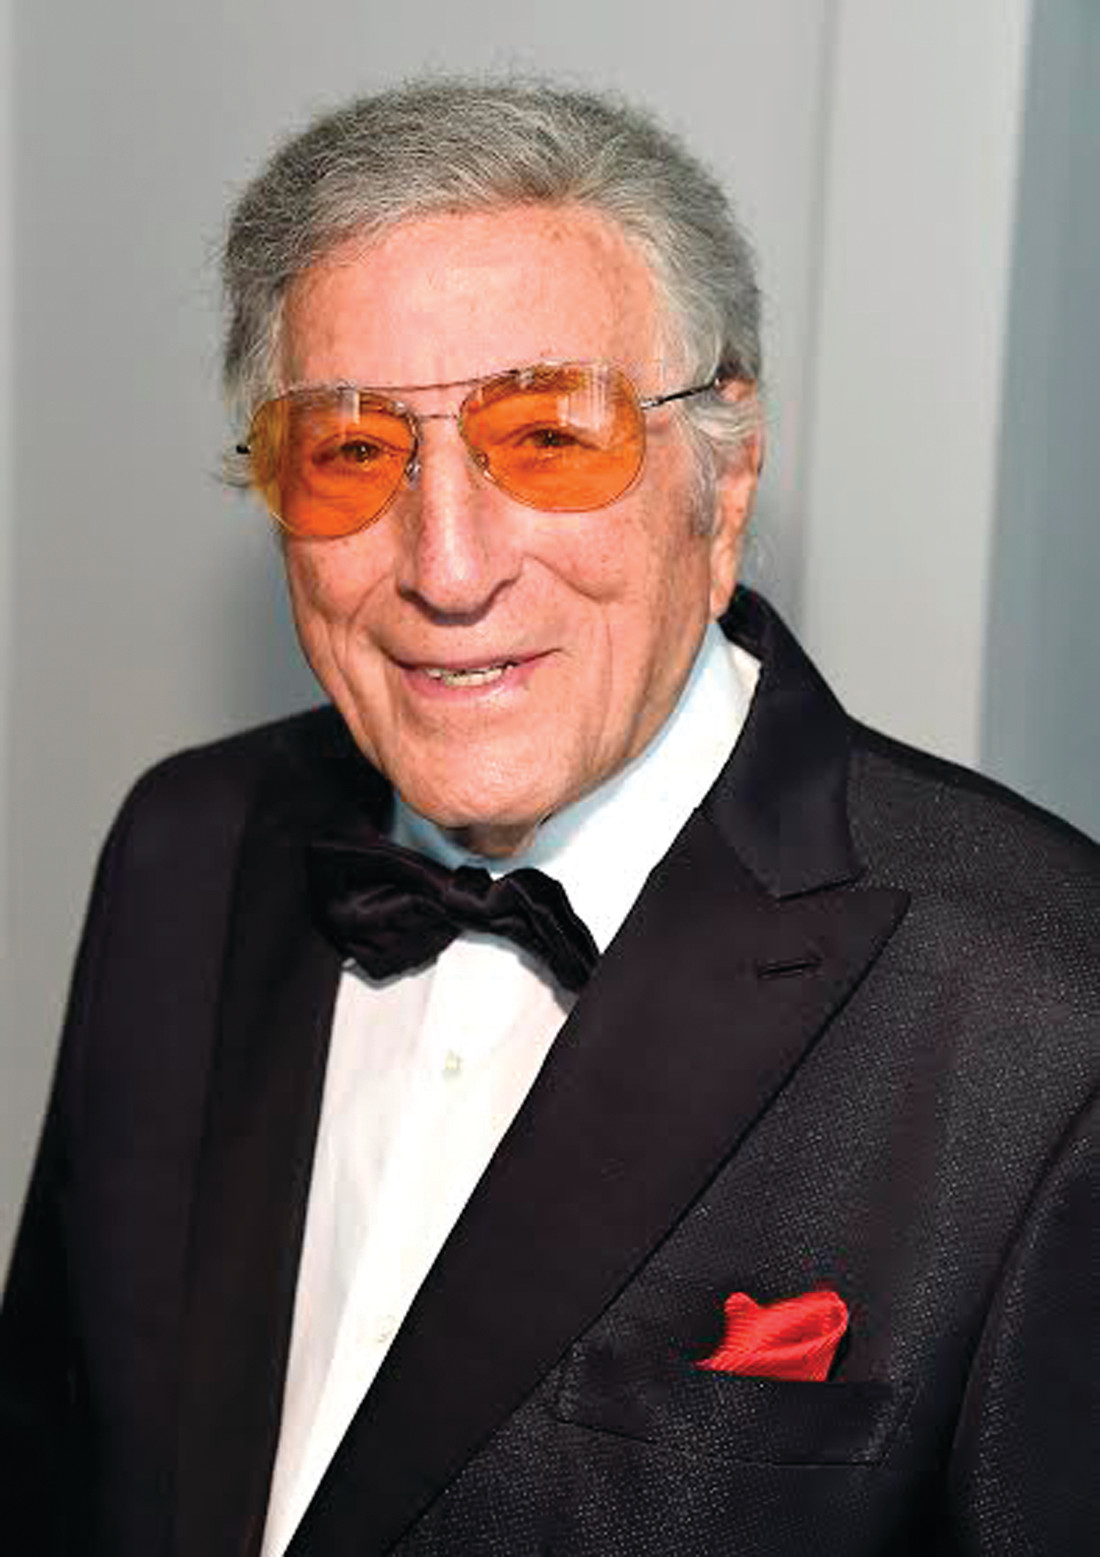 COOL CUSTOMER: Tony Bennett may have left his heart in San Francisco, but he didn’t forget the custom eyewear he received from Johnston-based OPTX Rhode Island.